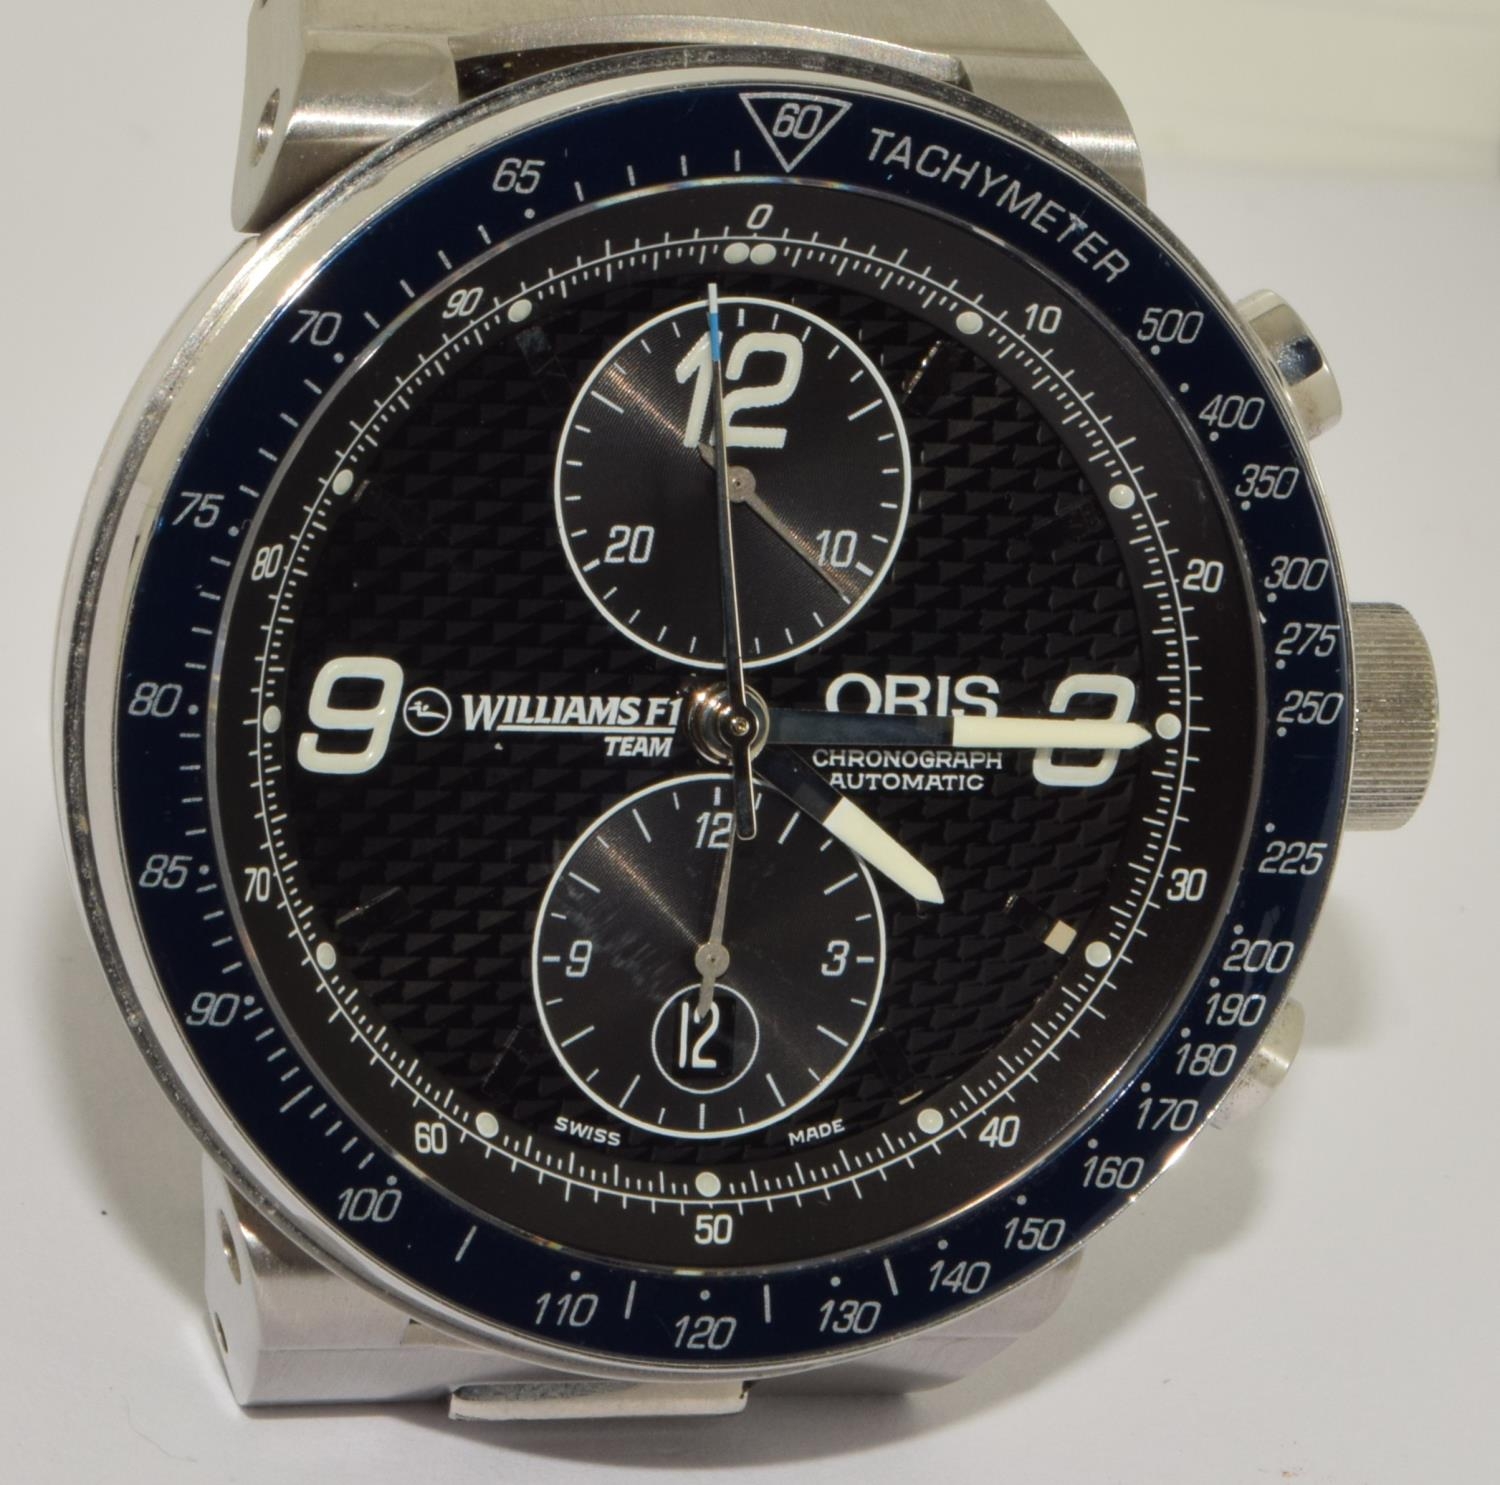 Oris Williams Formula 1 gents automatic chronograph ref:7563. In good clean working order. (ref:34) - Image 6 of 6